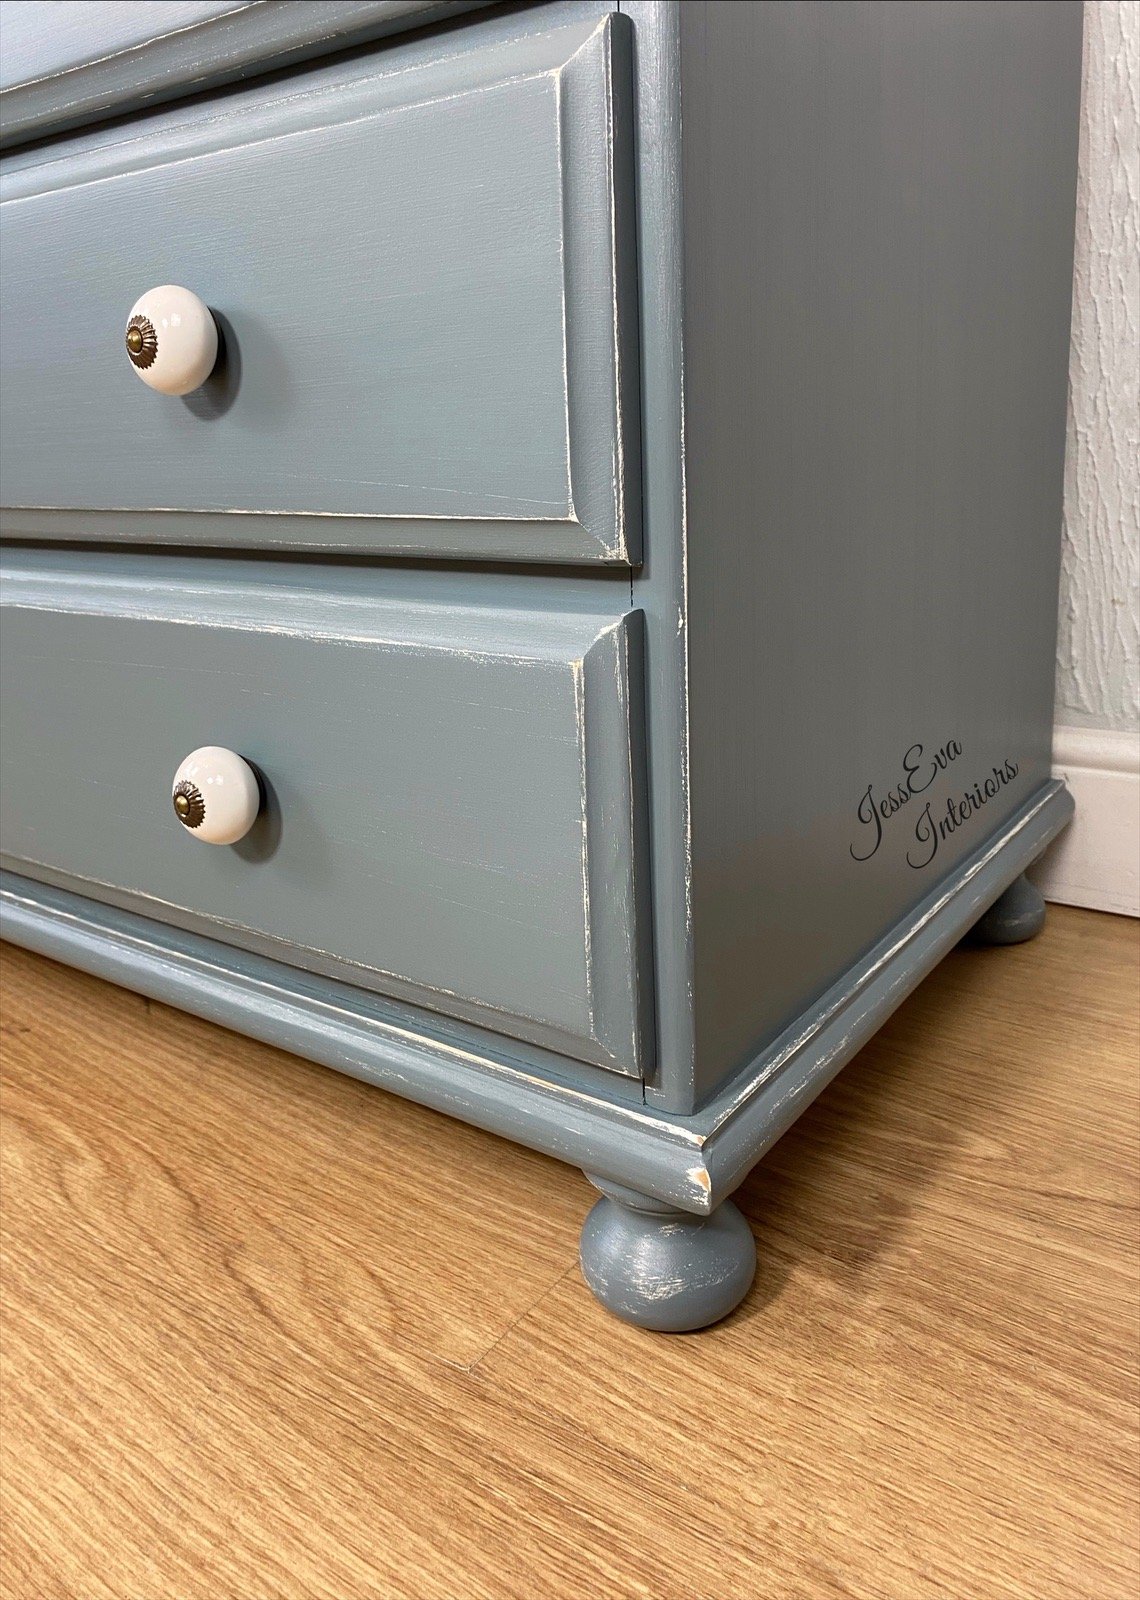 Pine Blue CHEST OF DRAWERS in French Shabby Chic style.